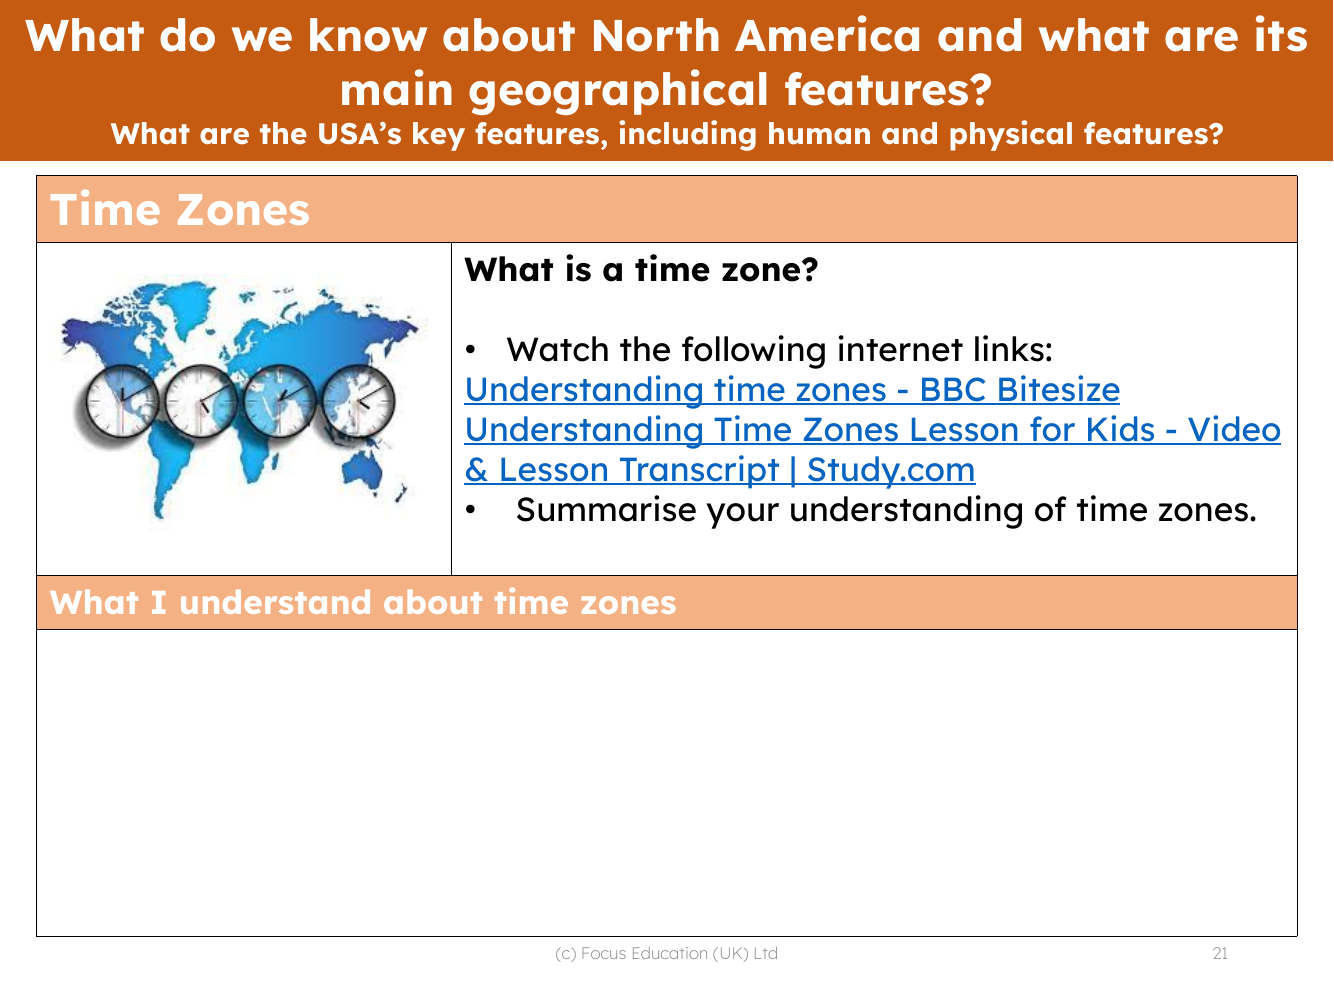 What I understand about time zones - Worksheet